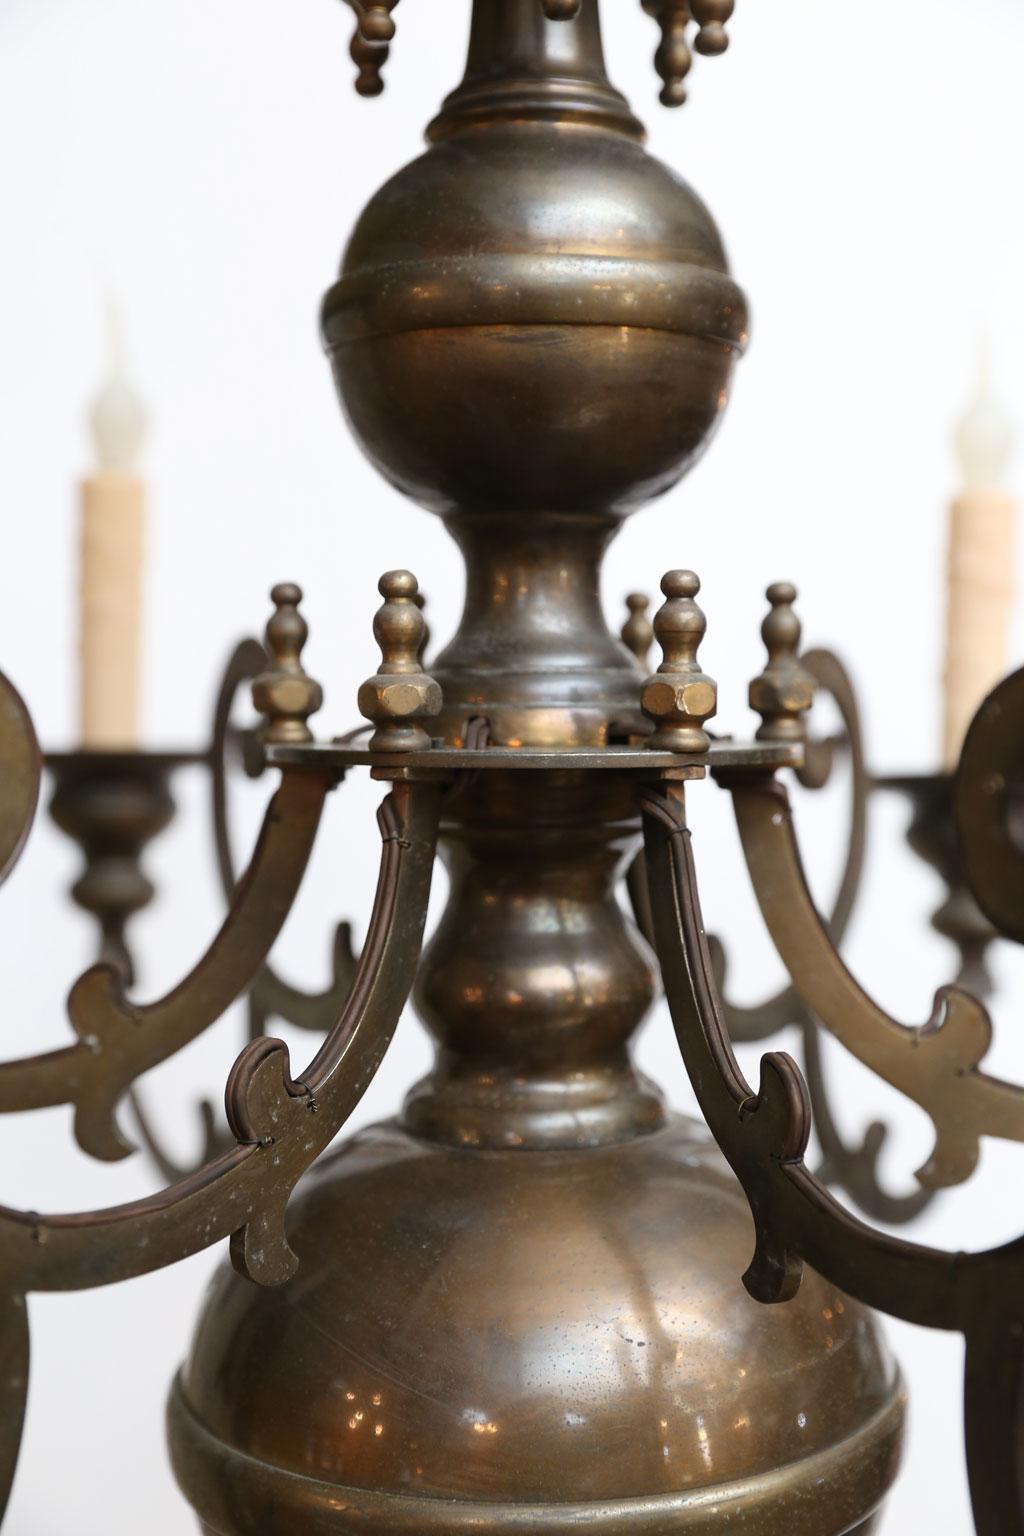 Cast Antique Bronze Georgian-Style Chandelier with Flat Arms and Beautiful Patina